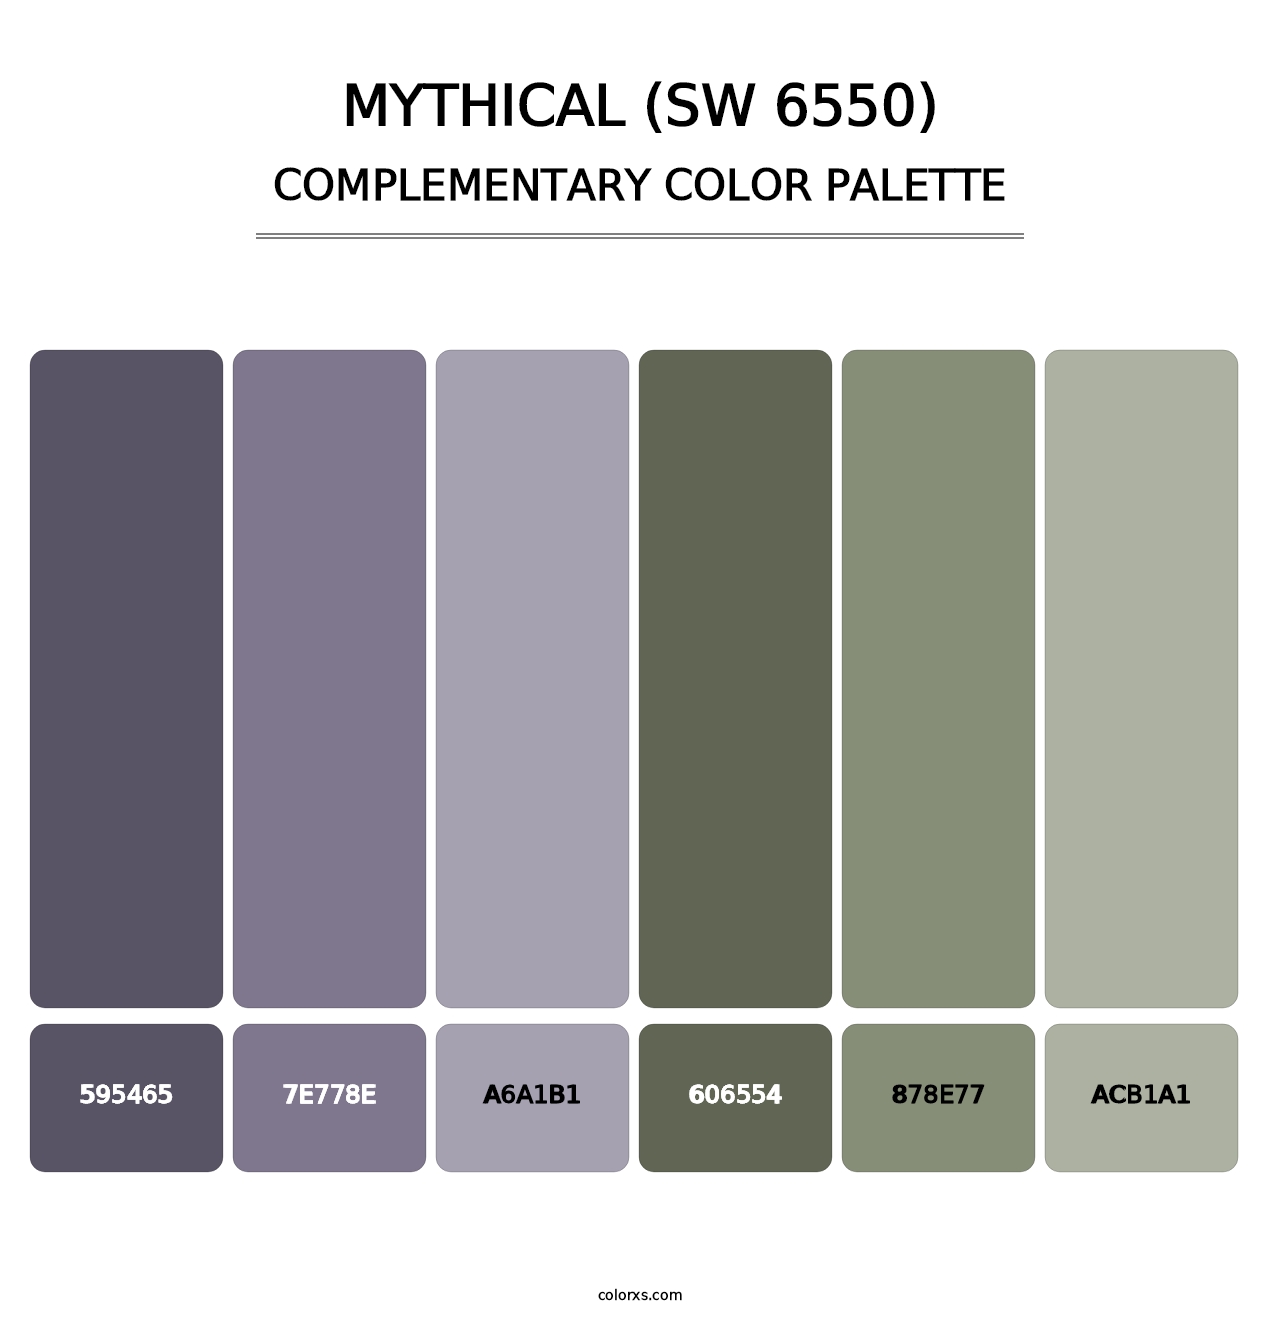 Mythical (SW 6550) - Complementary Color Palette